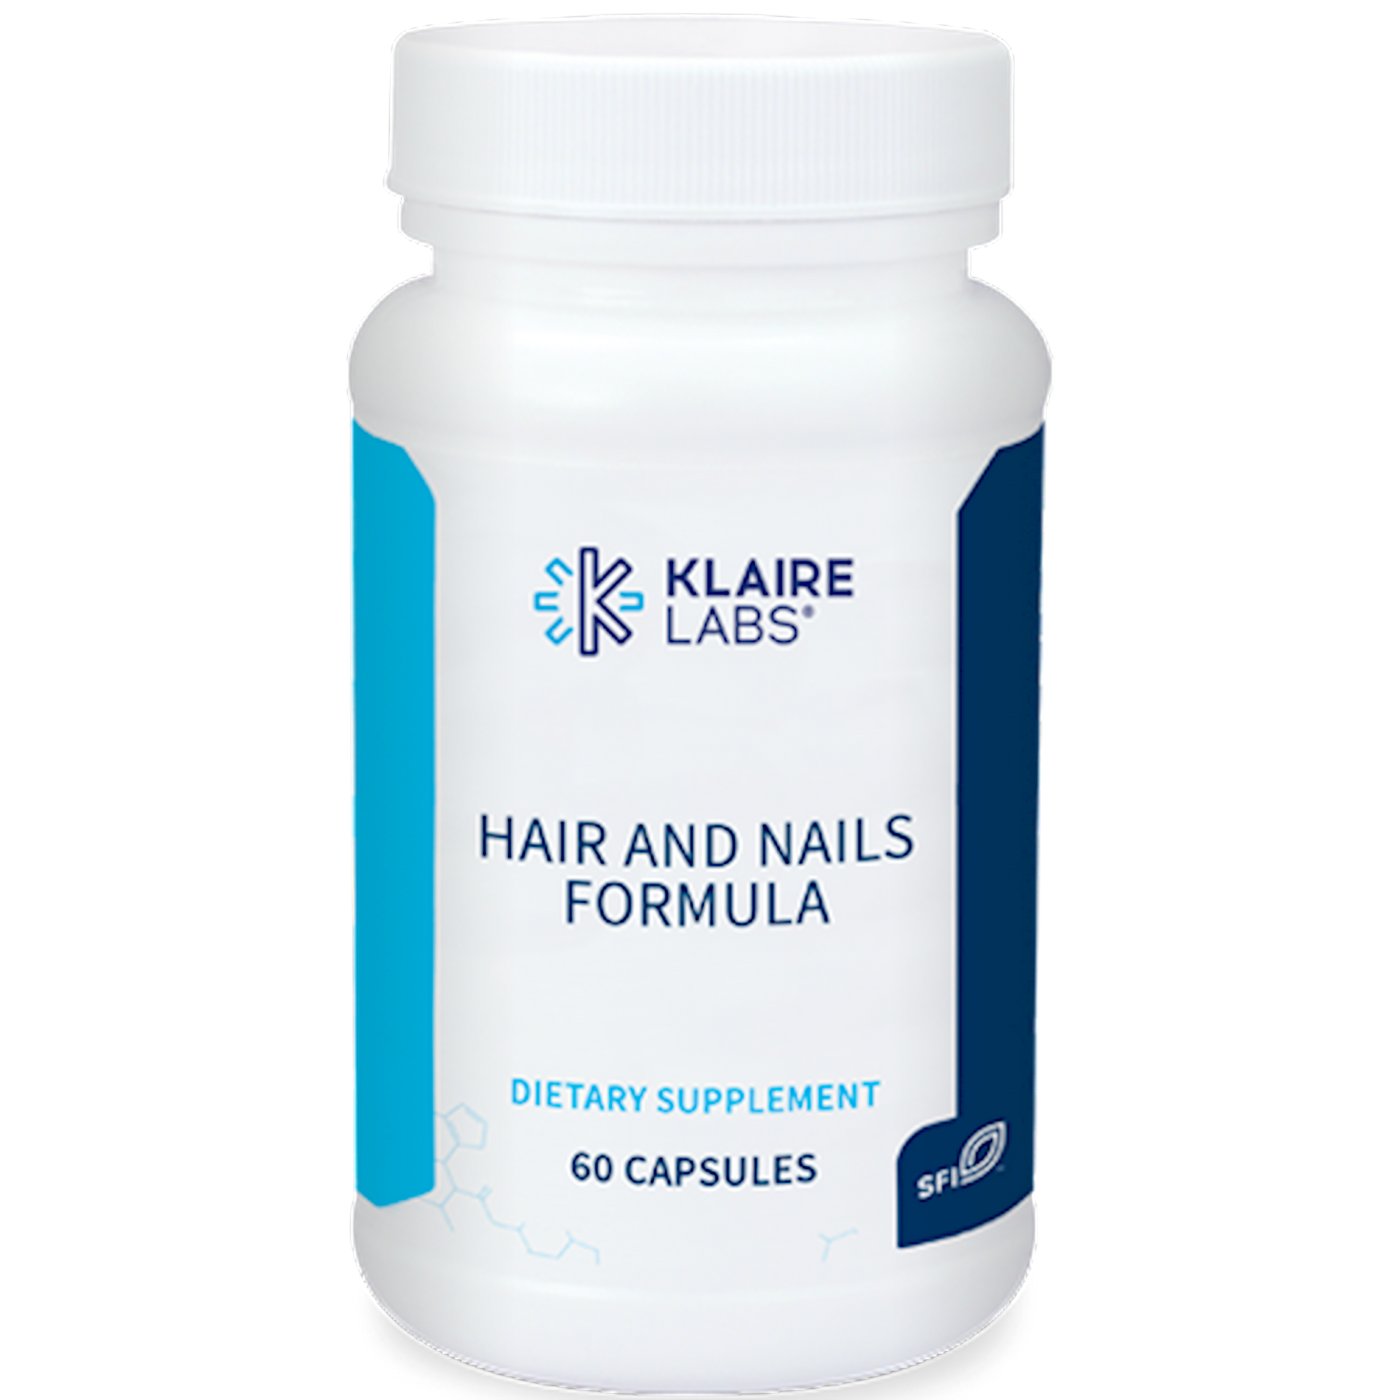 Hair and Nails Formula 60 Caps Curated Wellness